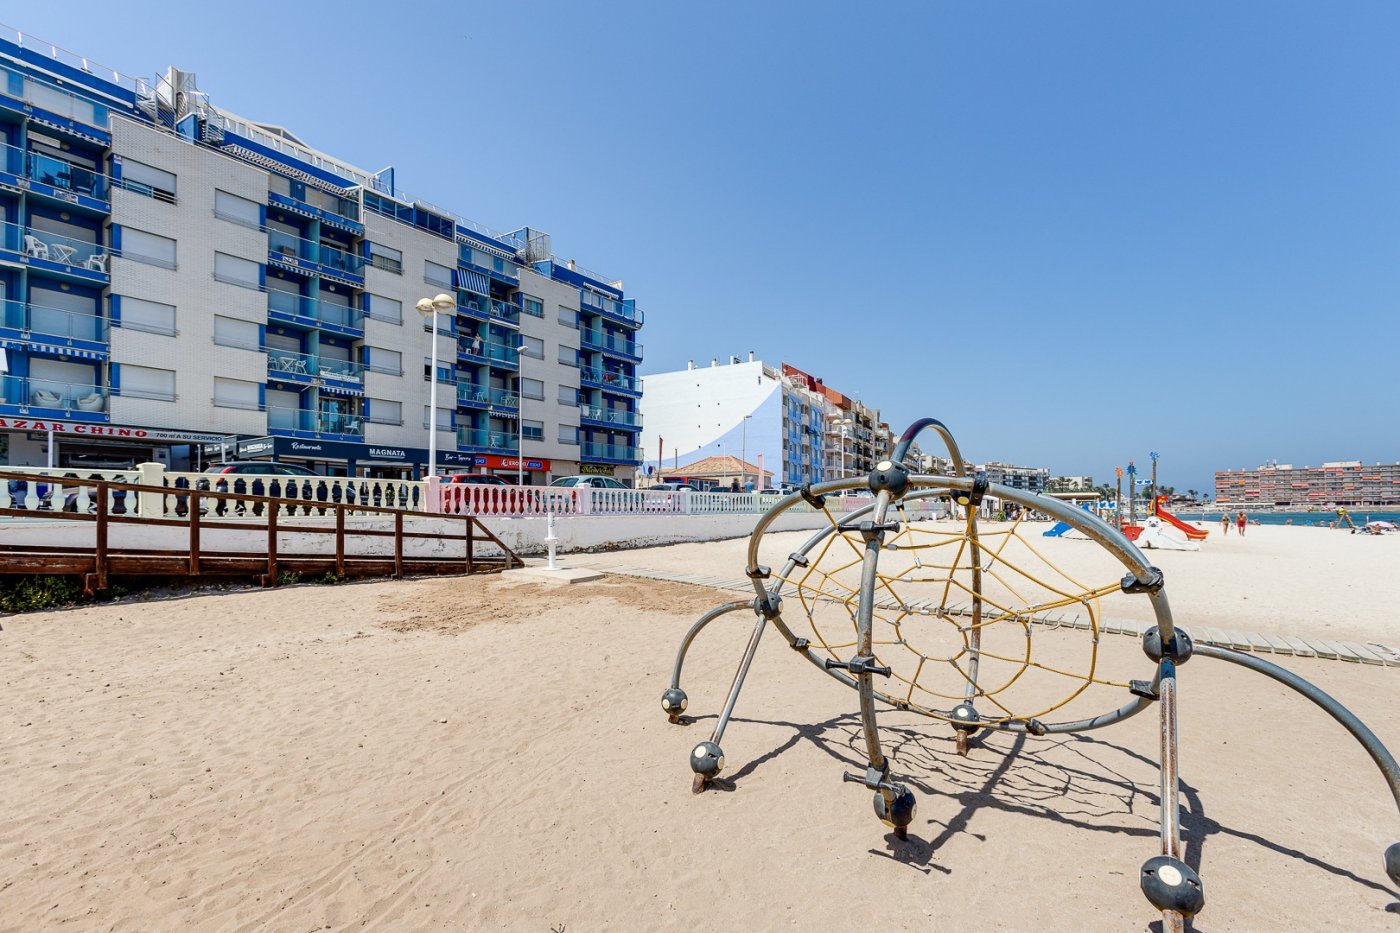 SOLD! Holiday apartment for sale in a beautiful complex on the beach of Playa De Los Locos in Torrevieja.